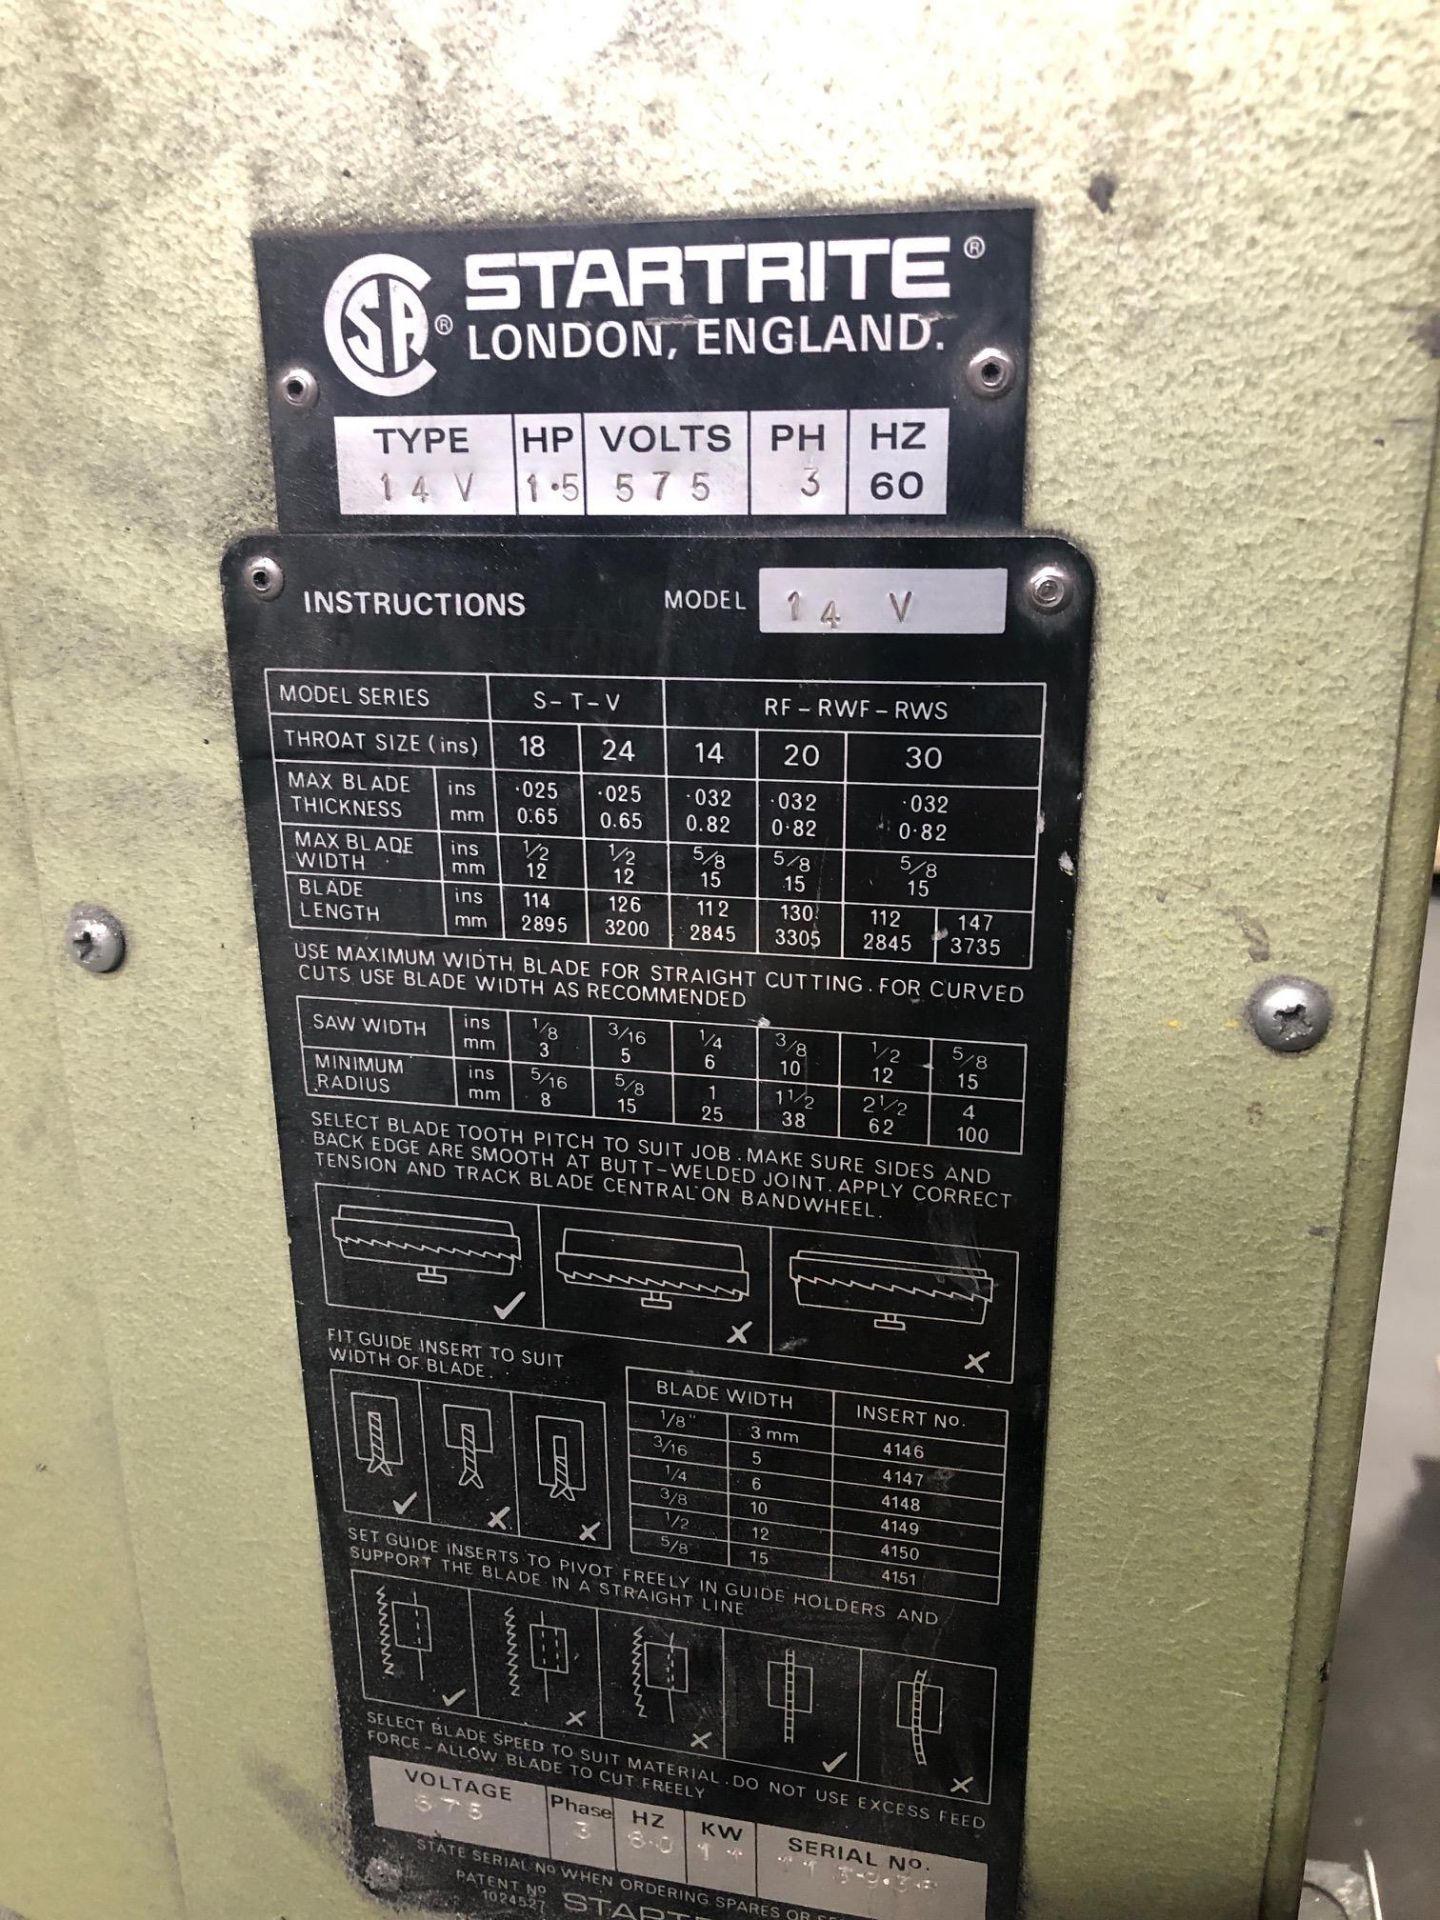 STARTRITE VERTICAL BAND SAW MOD: 14V, 575V 3PH * LOCATED AT 2630 SABOURIN ST., ST-LAURENT QC * - Image 2 of 2